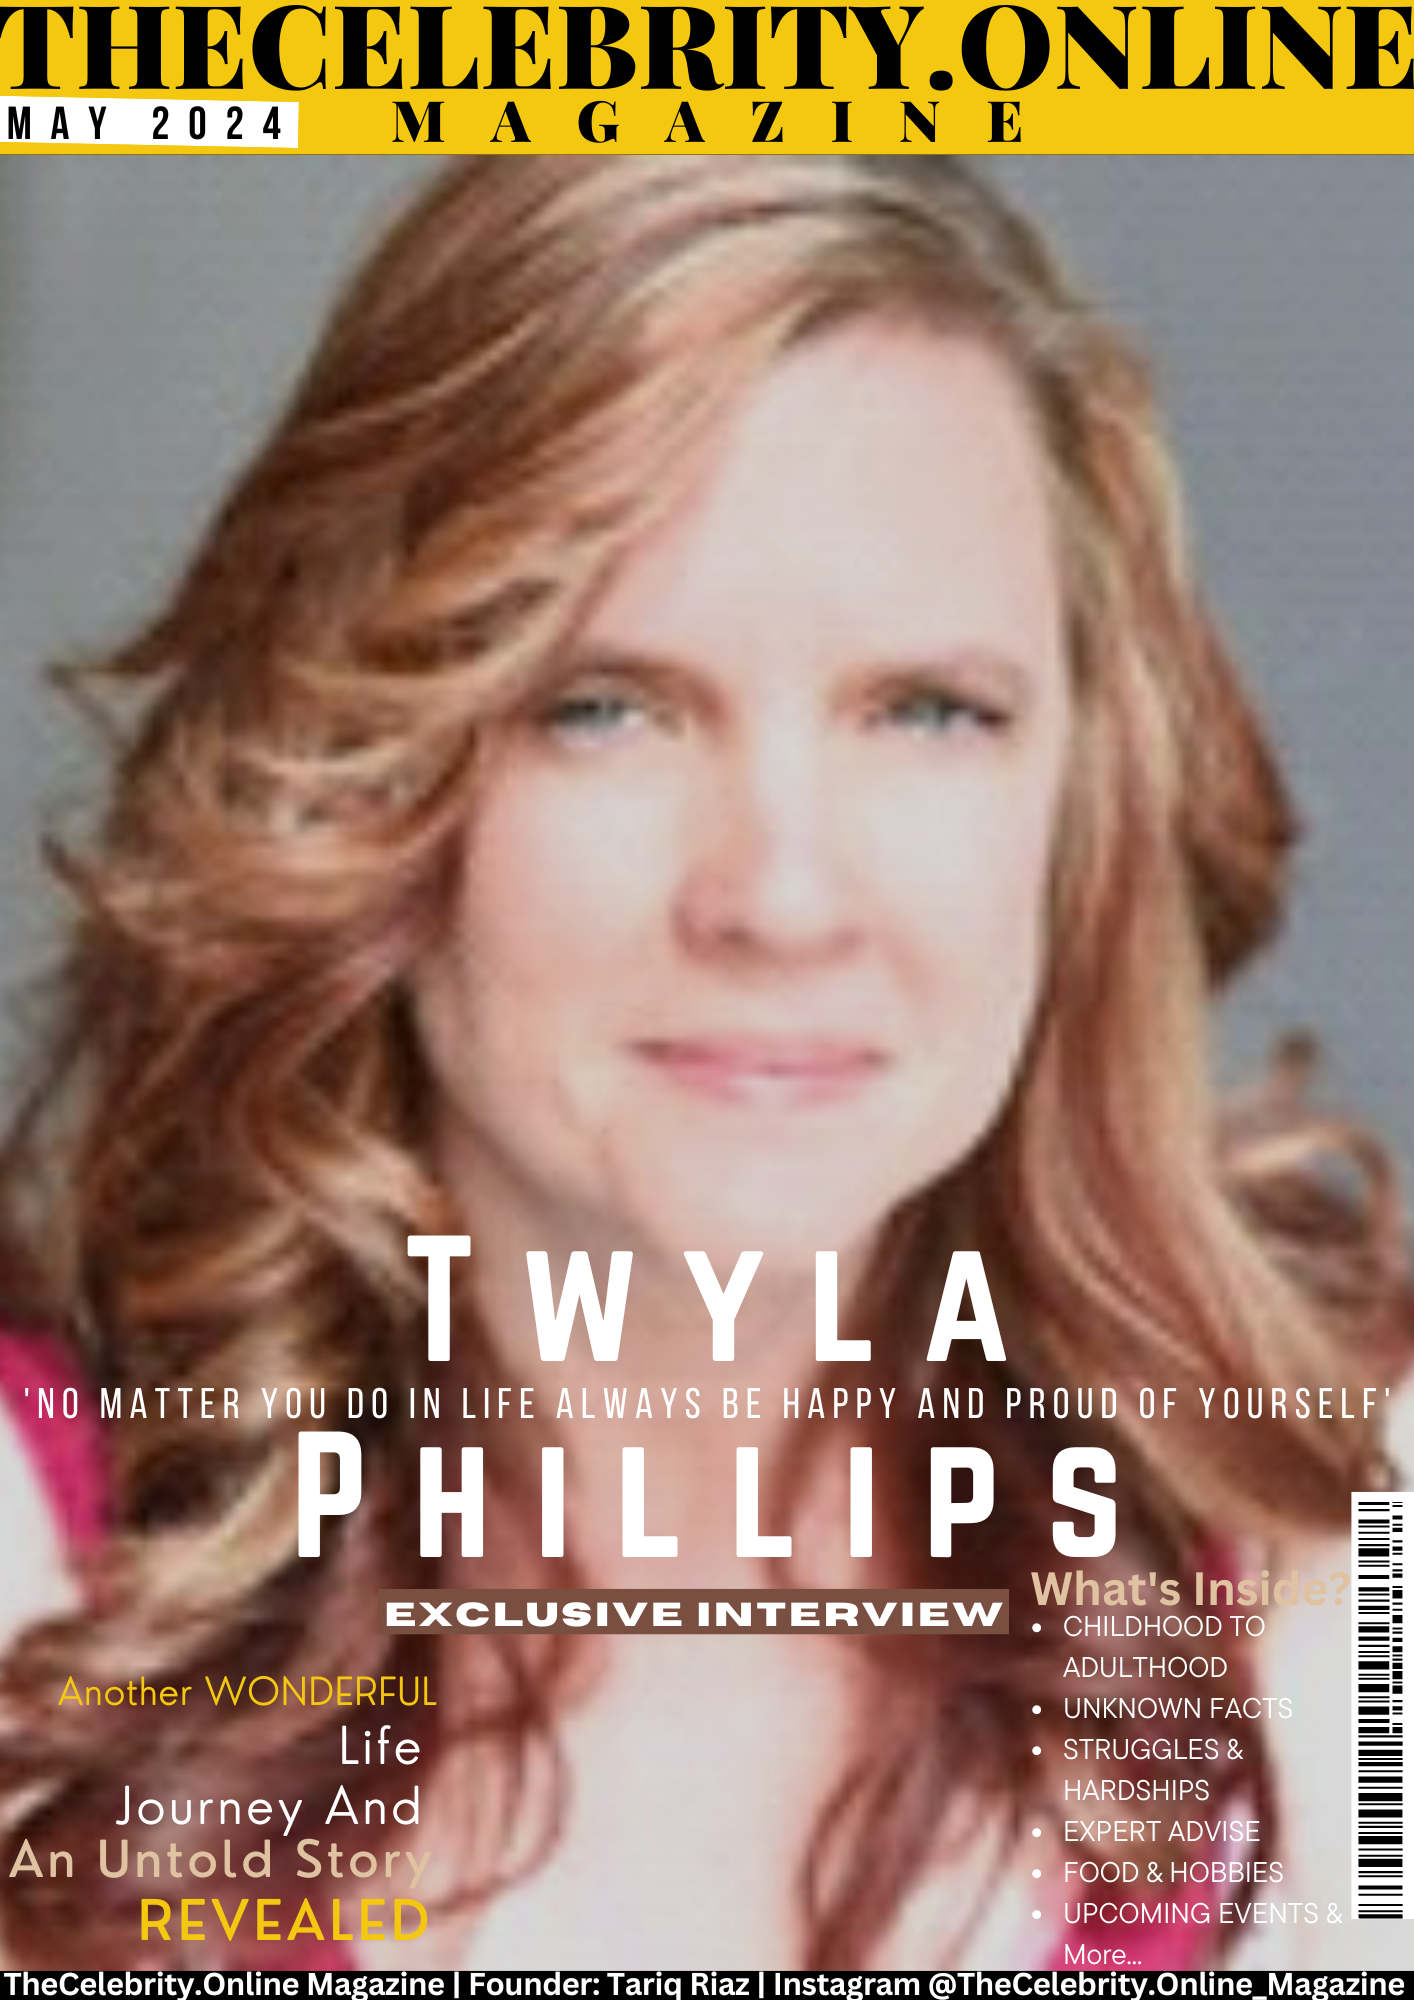 Twyla Phillips Exclusive Interview – ‘No Matter You Do In Life Always Be Happy And Proud Of Yourself’